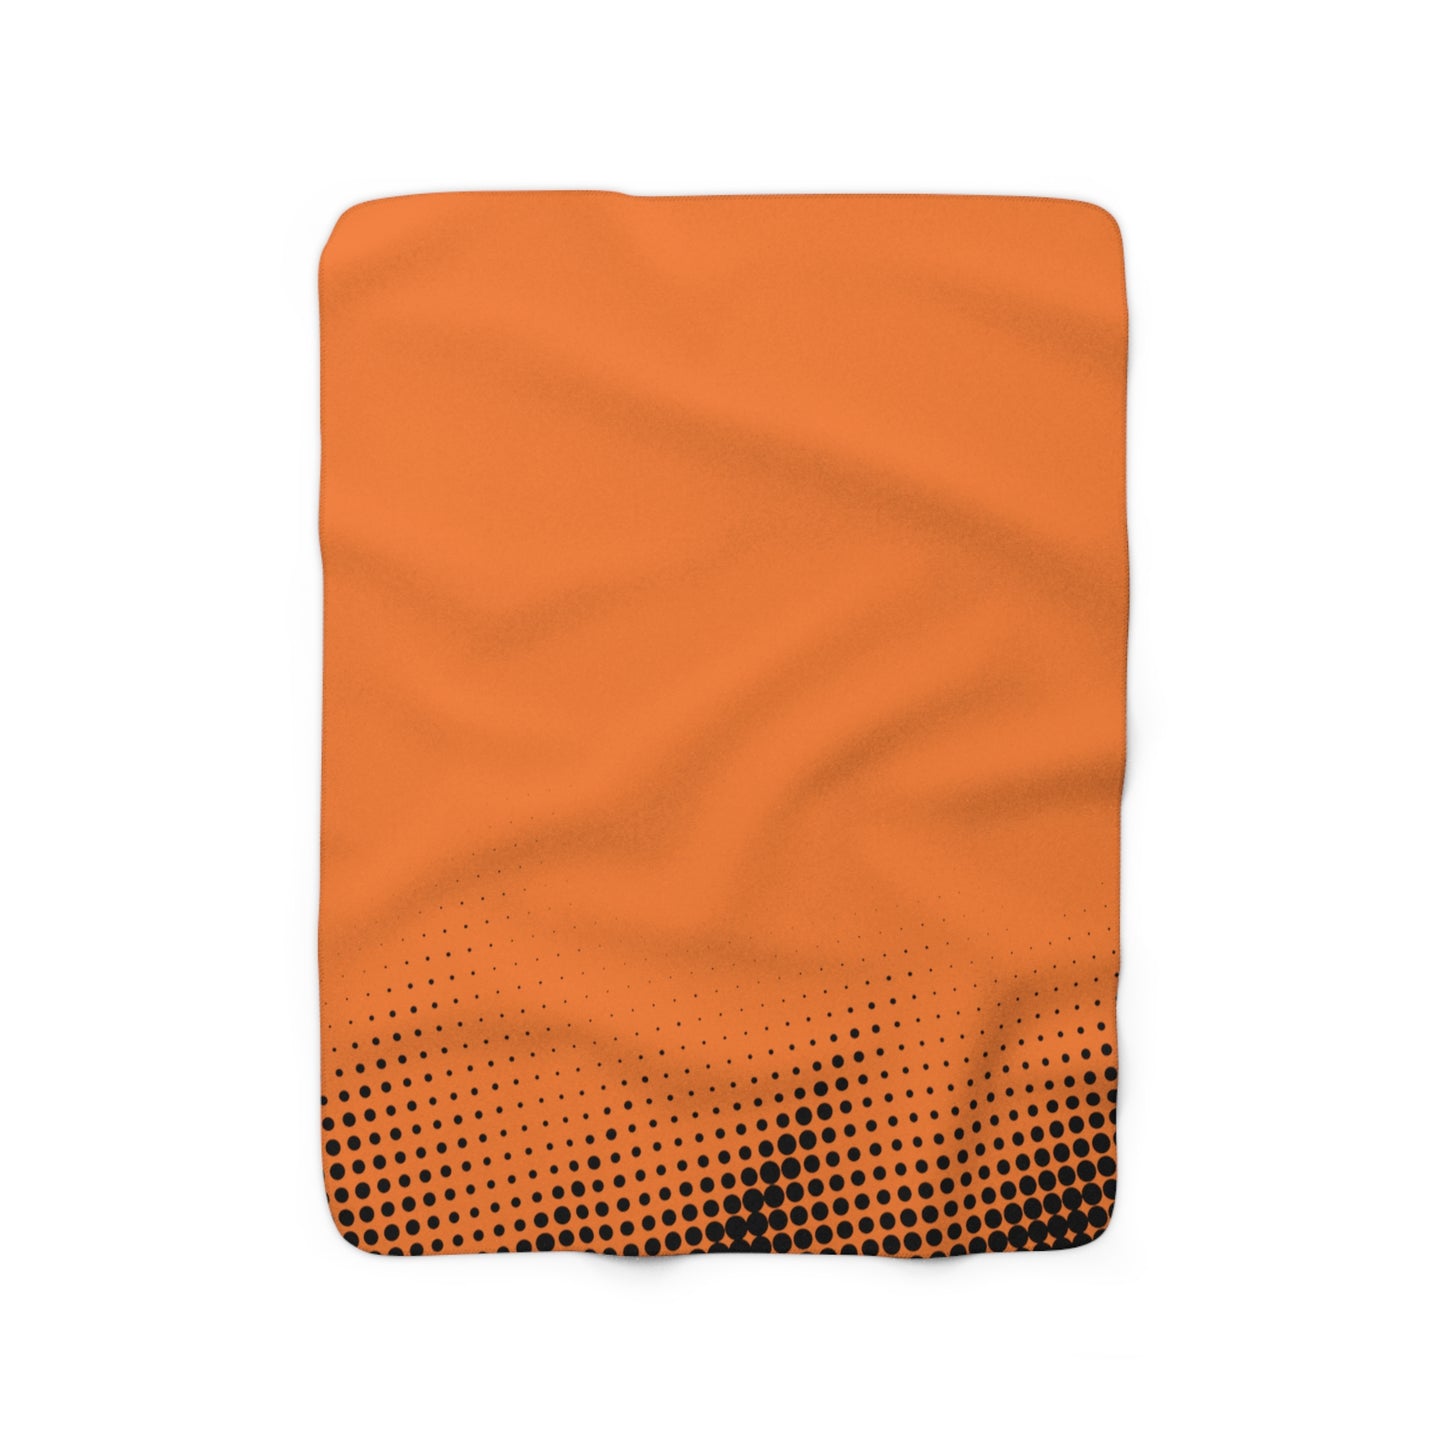 LUXURIOUS COZY BLANKET: THE EPITOME OF COMFORT AND WARMTH | Waves dots orange 